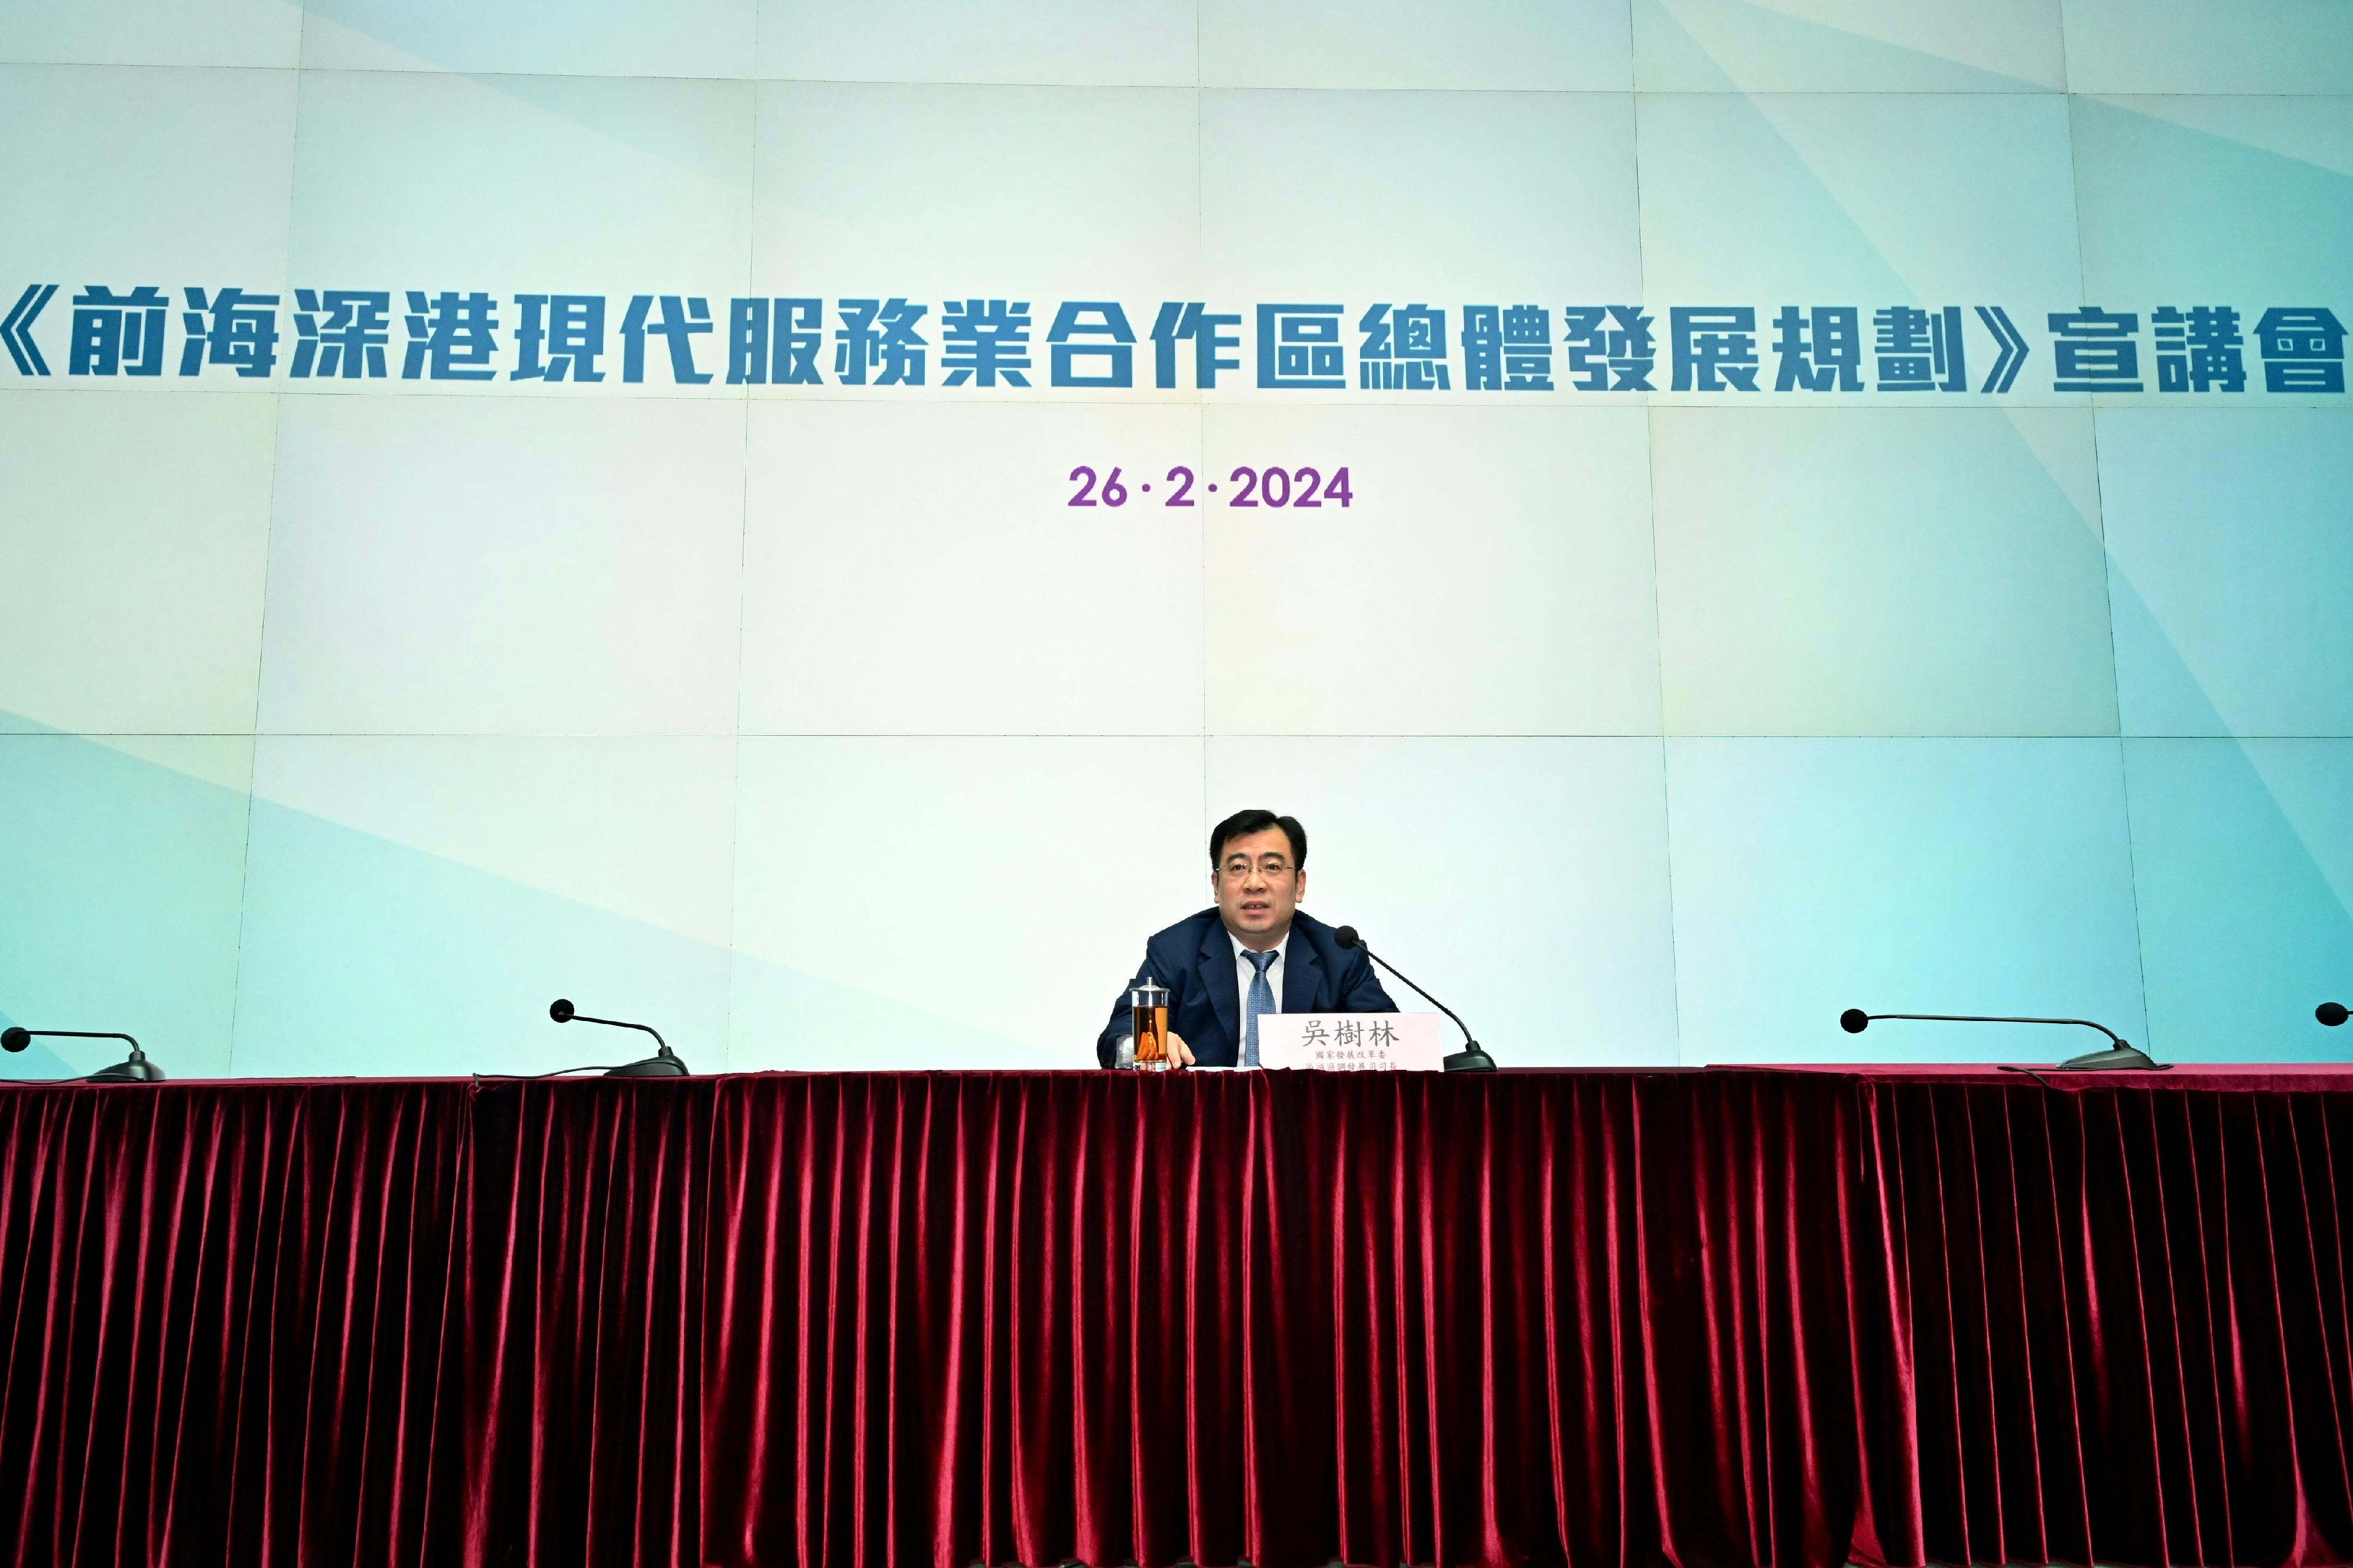 The HKSAR Government held a seminar to promote the Overall Development Plan for the Qianhai Shenzhen-Hong Kong Modern Service Industry Co-operation Zone at the Central Government Offices today (February 26).  Photo shows the Director General of the Department of Regional Economy of the National Development and Reform Commission, Mr Wu Shulin, delivering a thematic presentation on "Shouldering the mission and forging ahead to open up new horizons for the Shenzhen-Hong Kong Modern Service Industry Co-operation Zone".